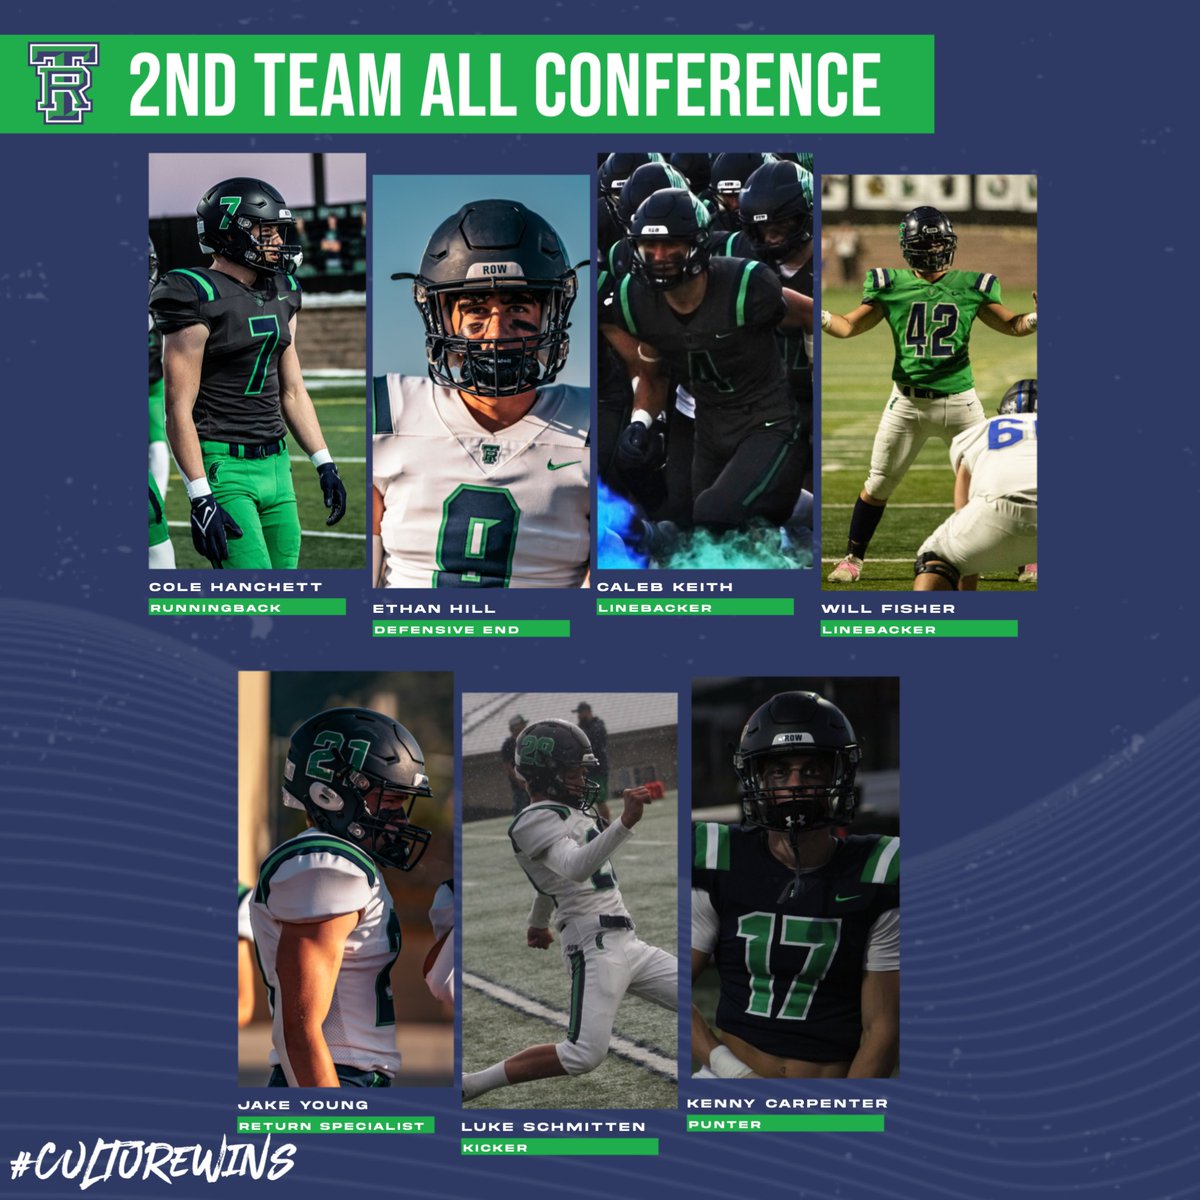 Congrats #TRFootball 2nd Team All Conference! #CultureWins #RowTheBoat #copreps